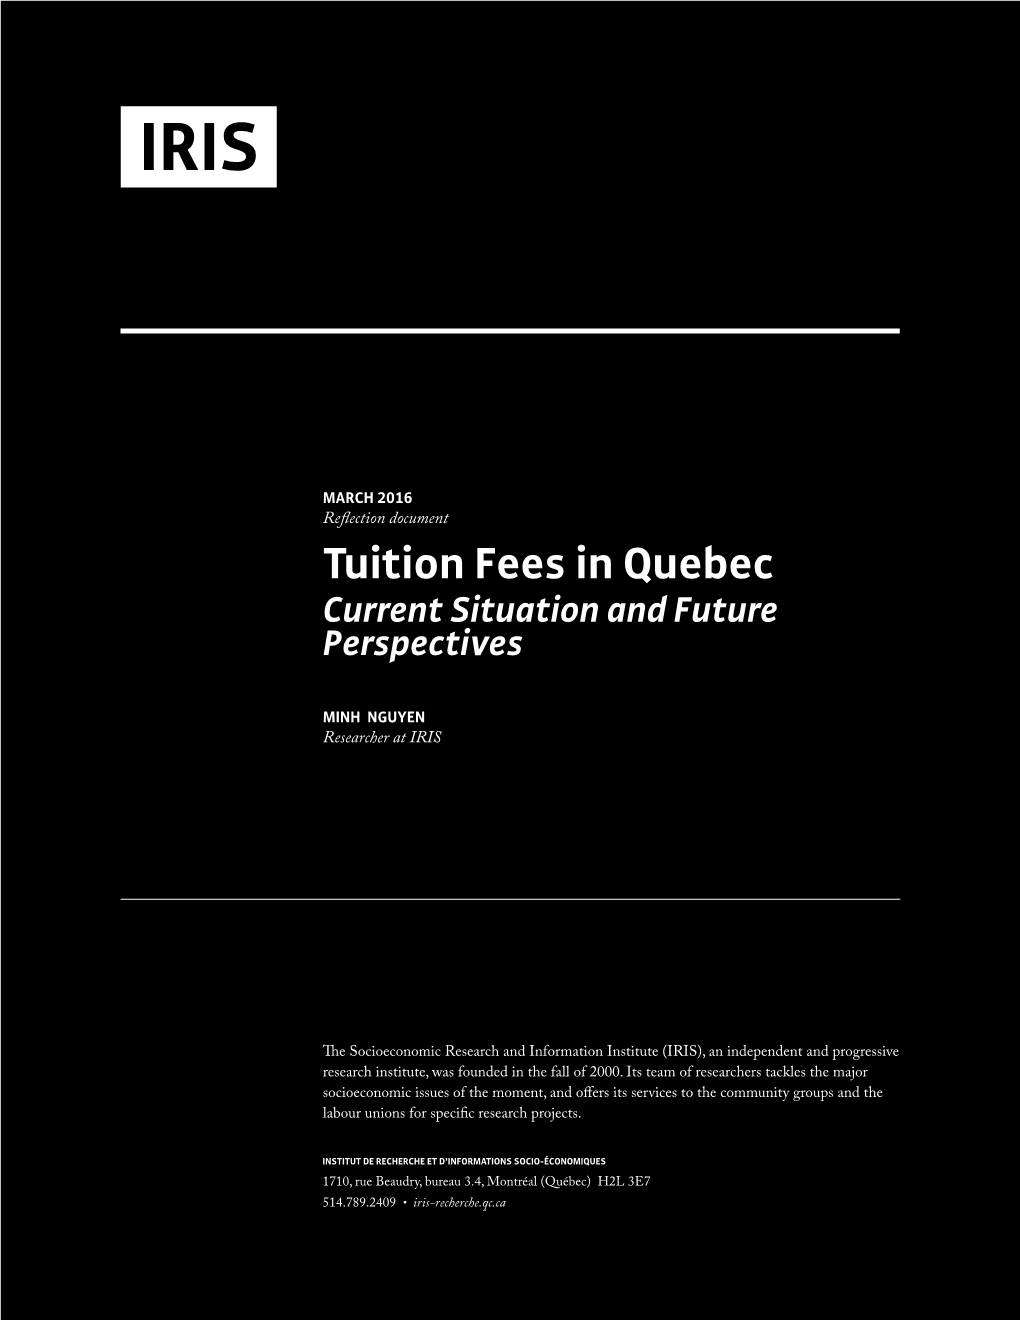 Tuition Fees in Quebec Current Situation and Future Perspectives